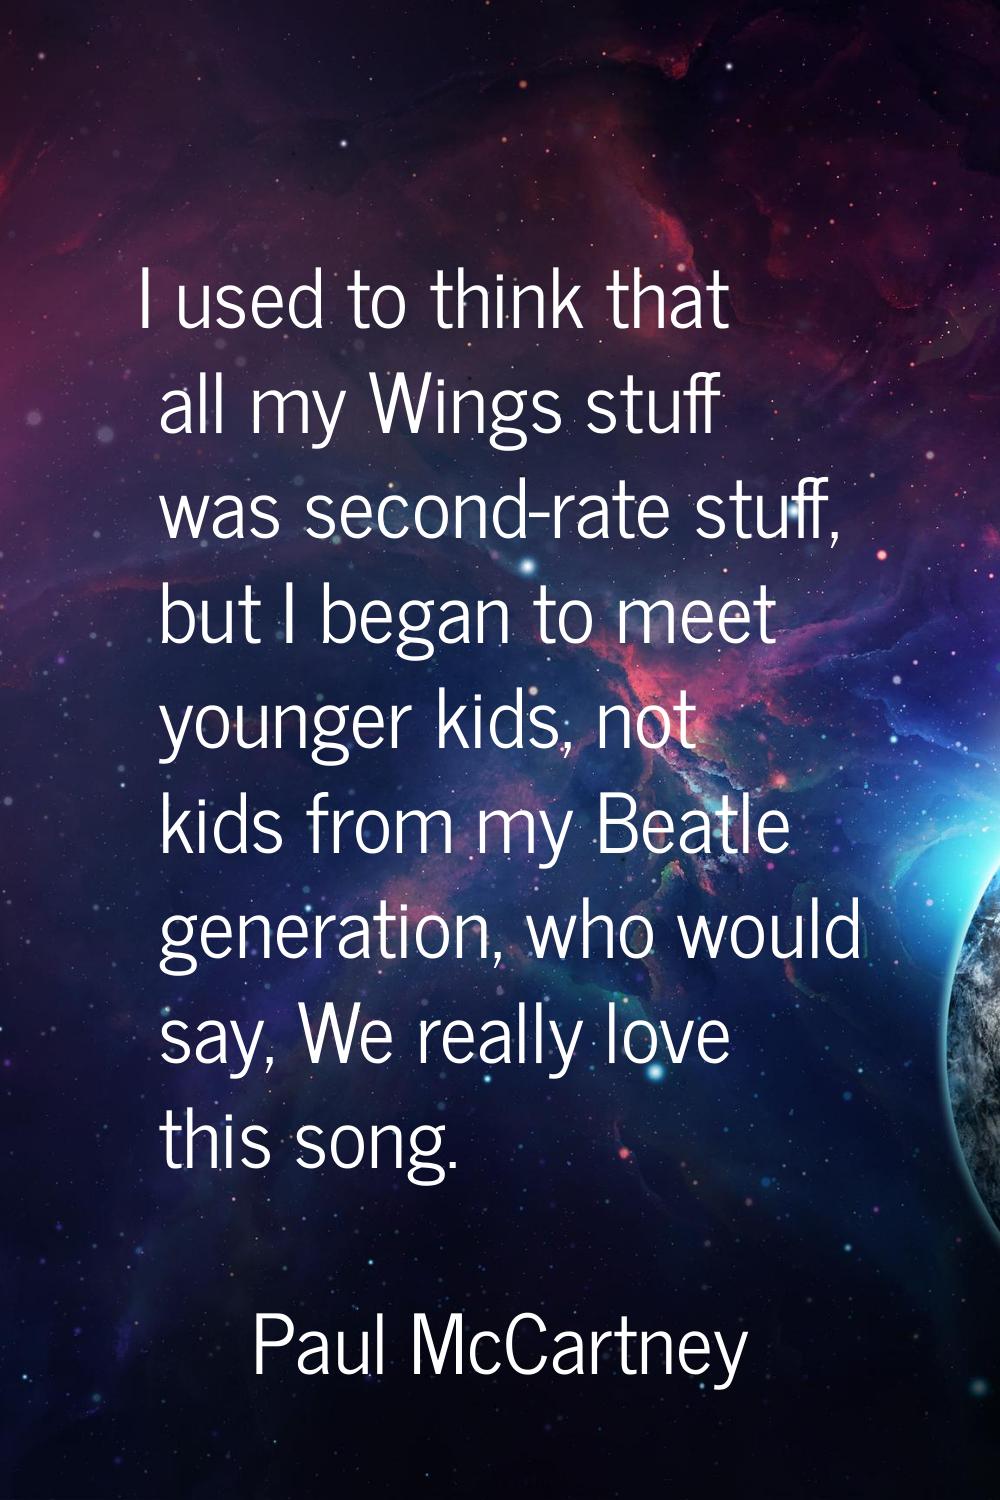 I used to think that all my Wings stuff was second-rate stuff, but I began to meet younger kids, no